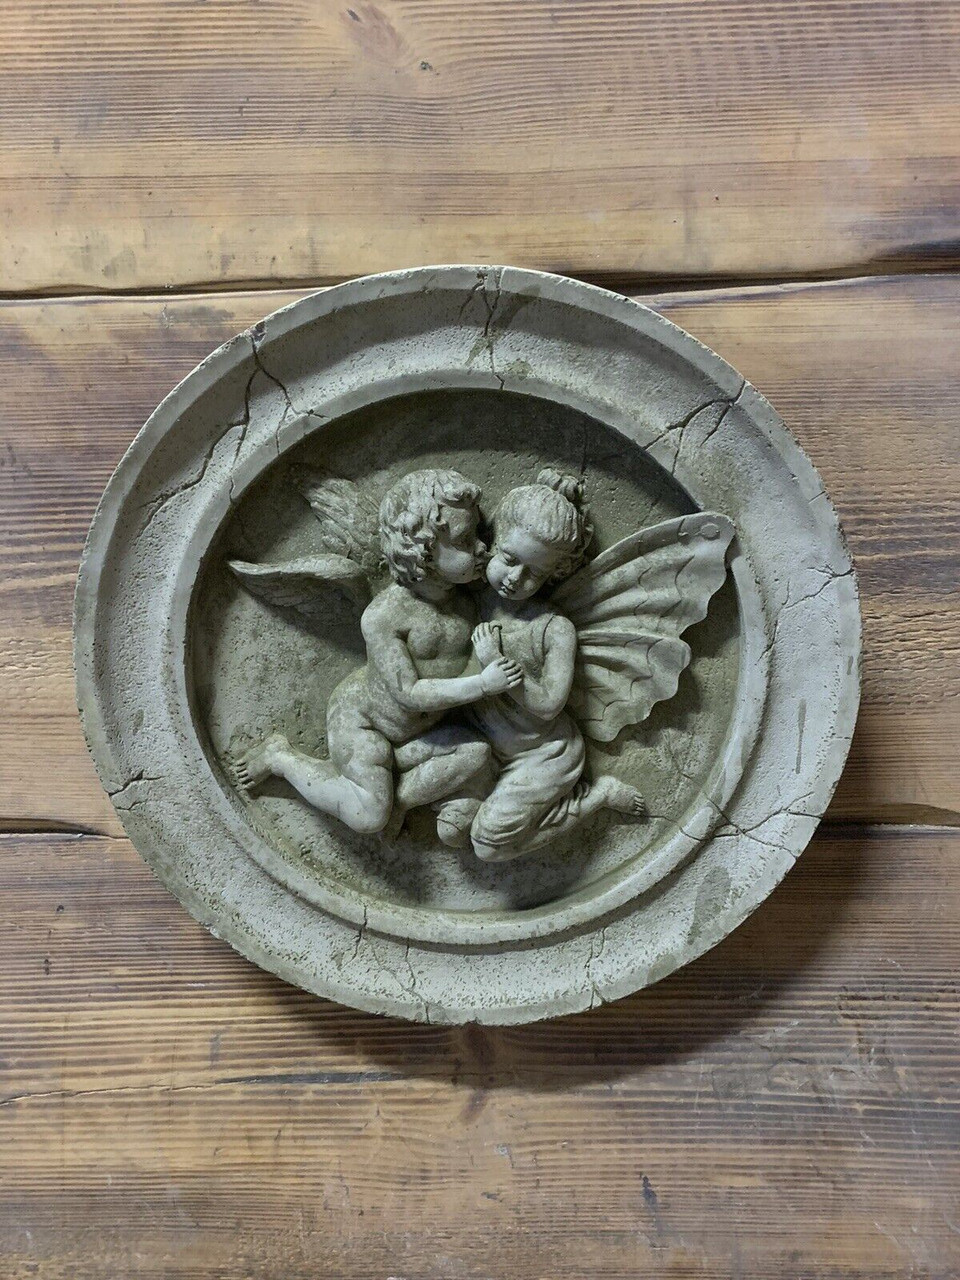 STONE GARDEN CHERUB AND FAIRY WEATHERED PLAQUE HANGING ORNAMENT